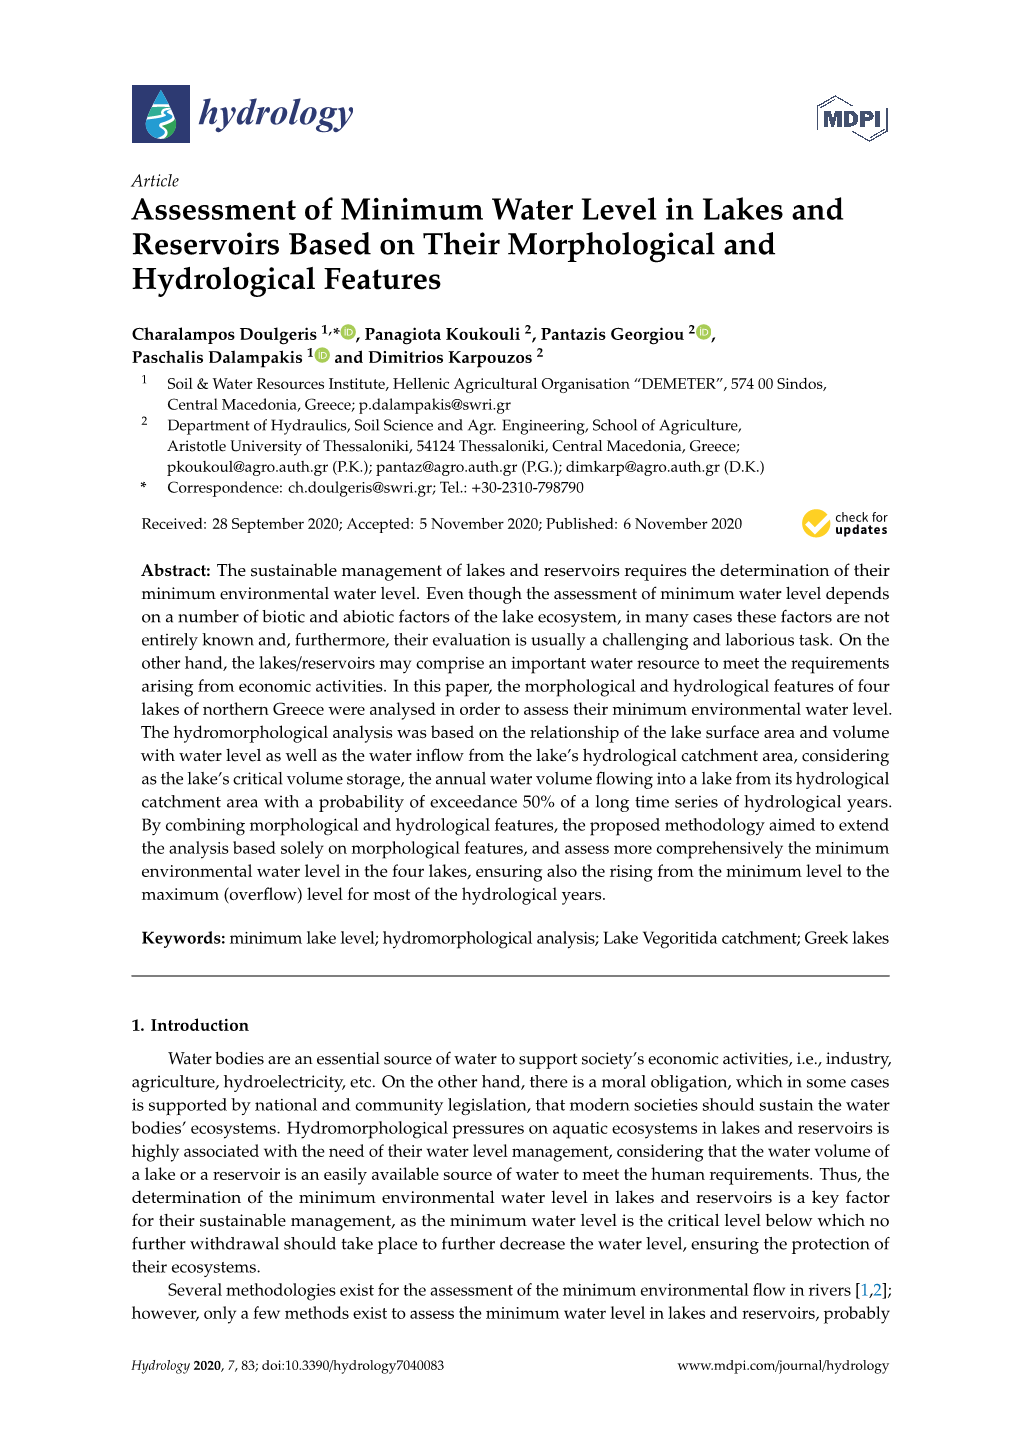 Assessment of Minimum Water Level in Lakes and Reservoirs Based on Their Morphological and Hydrological Features